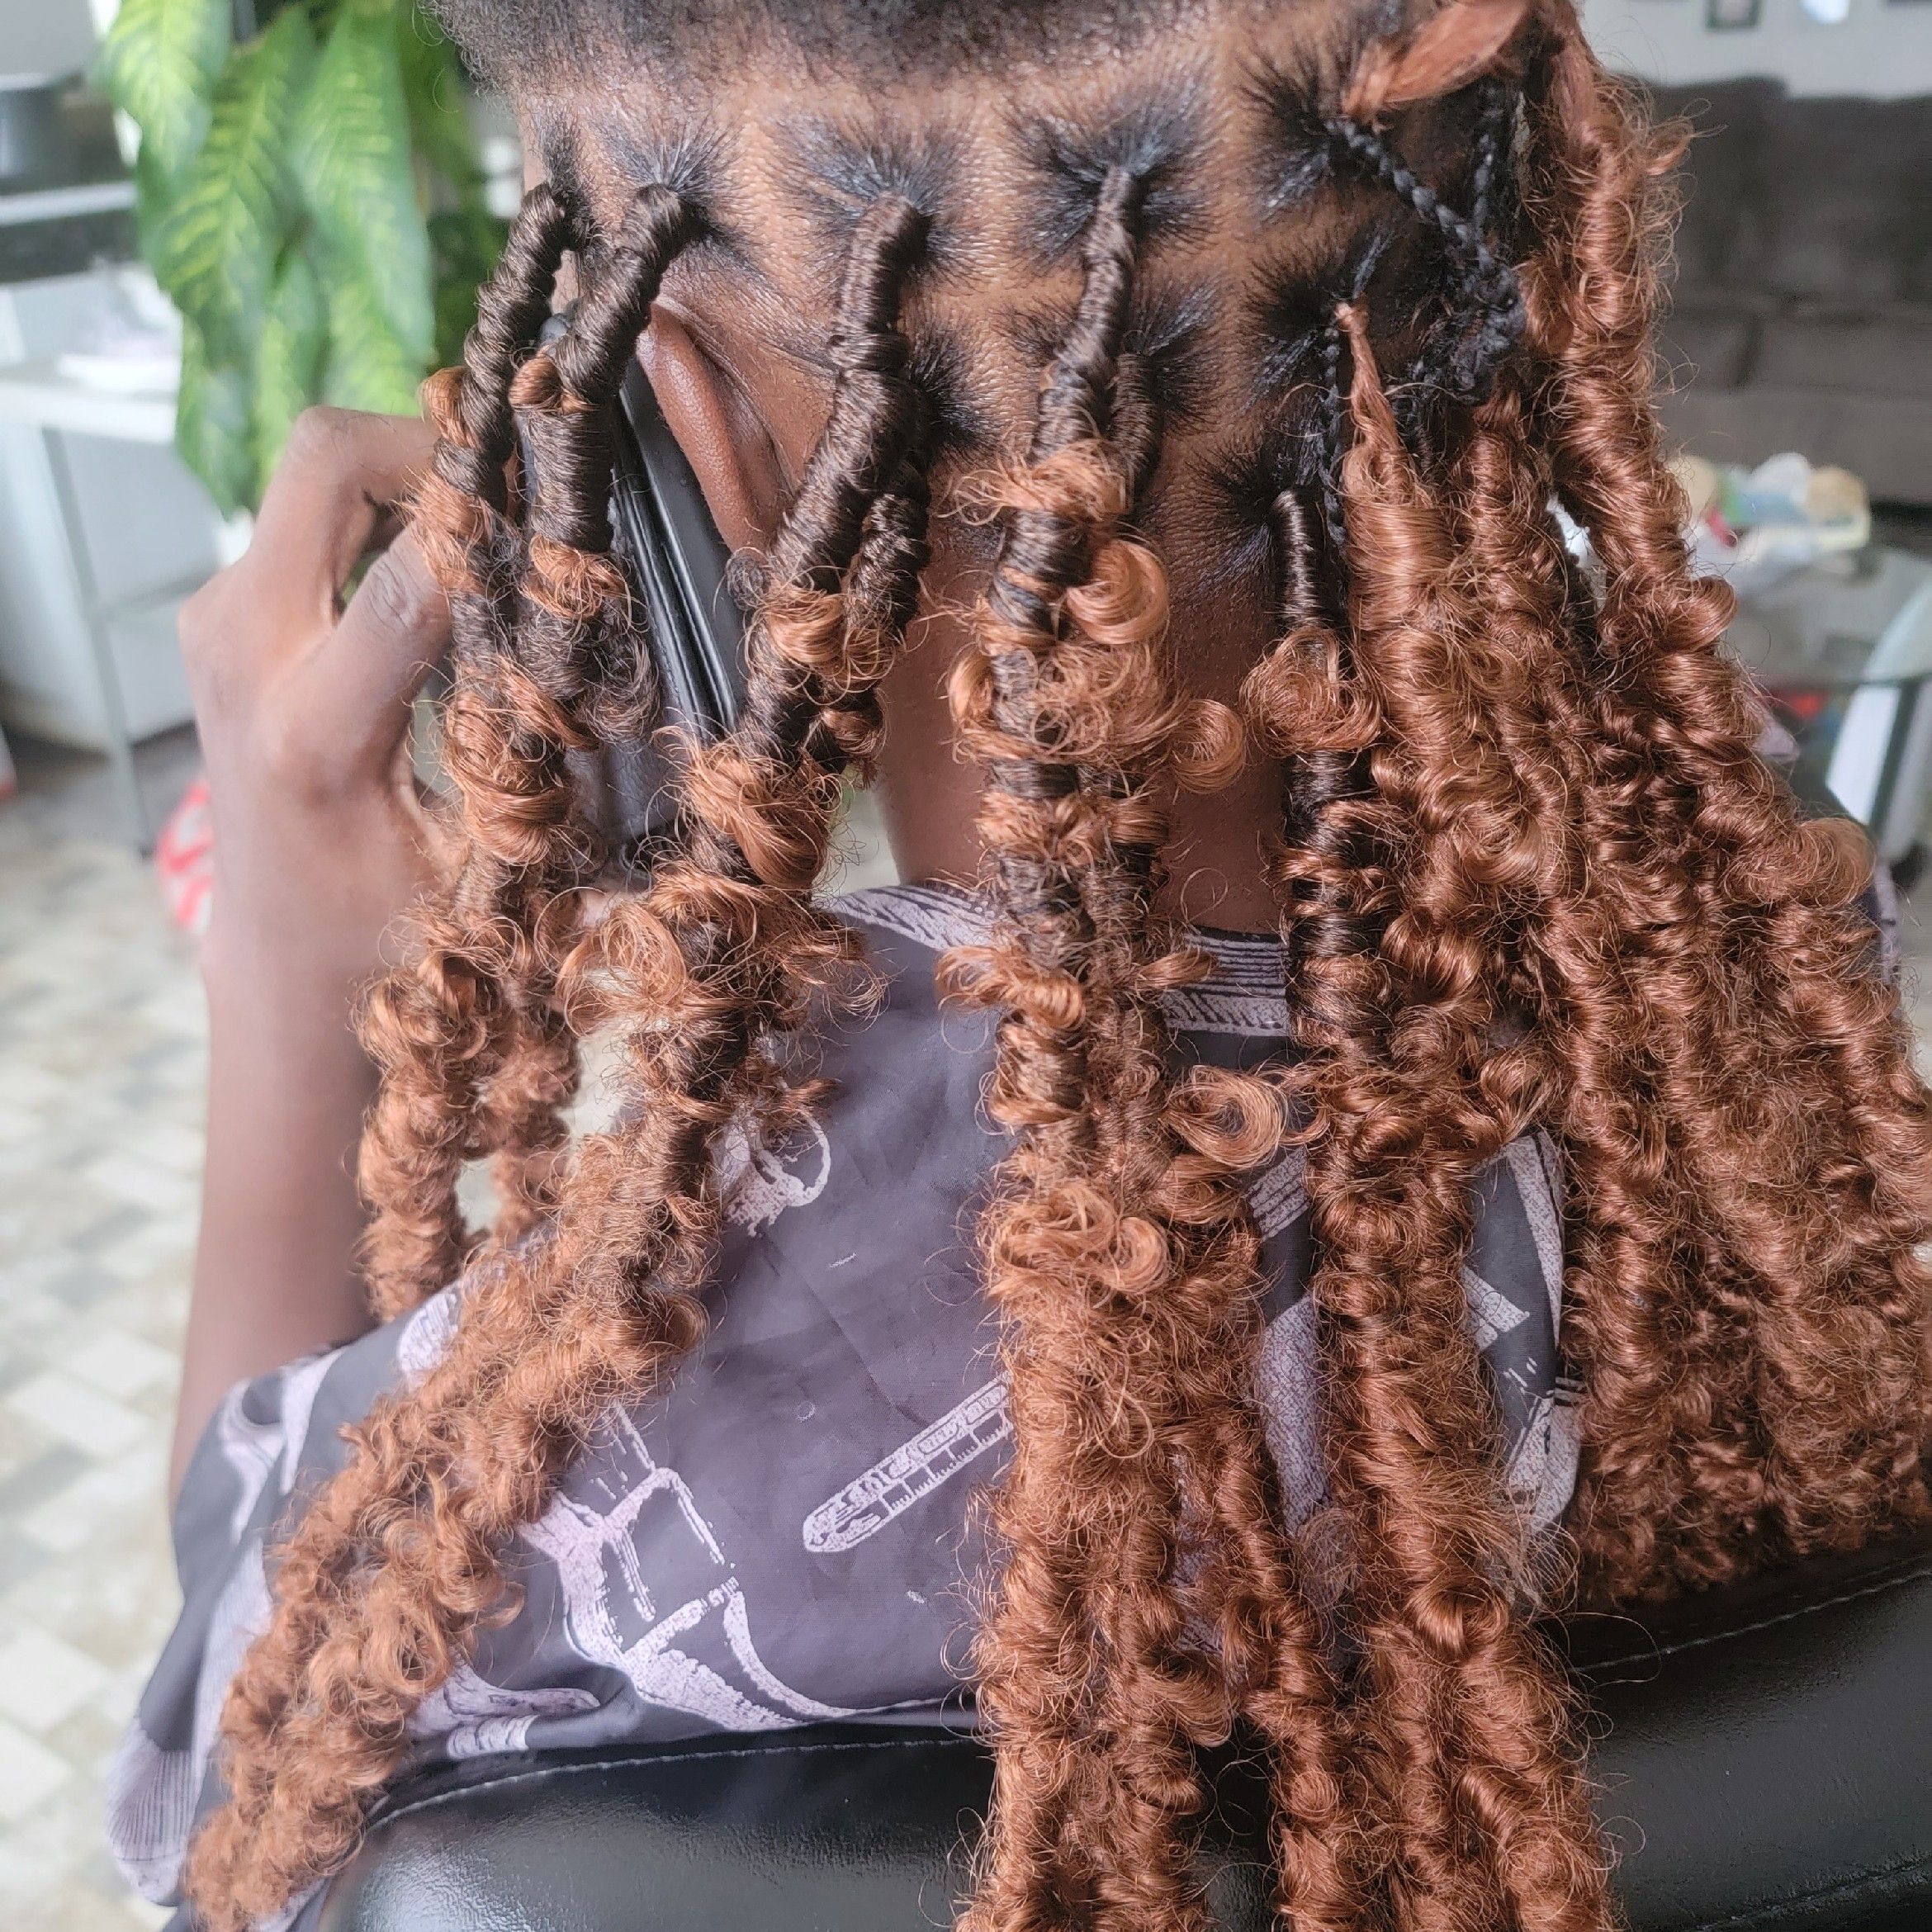 Butterfly locs mid back/hair included portfolio